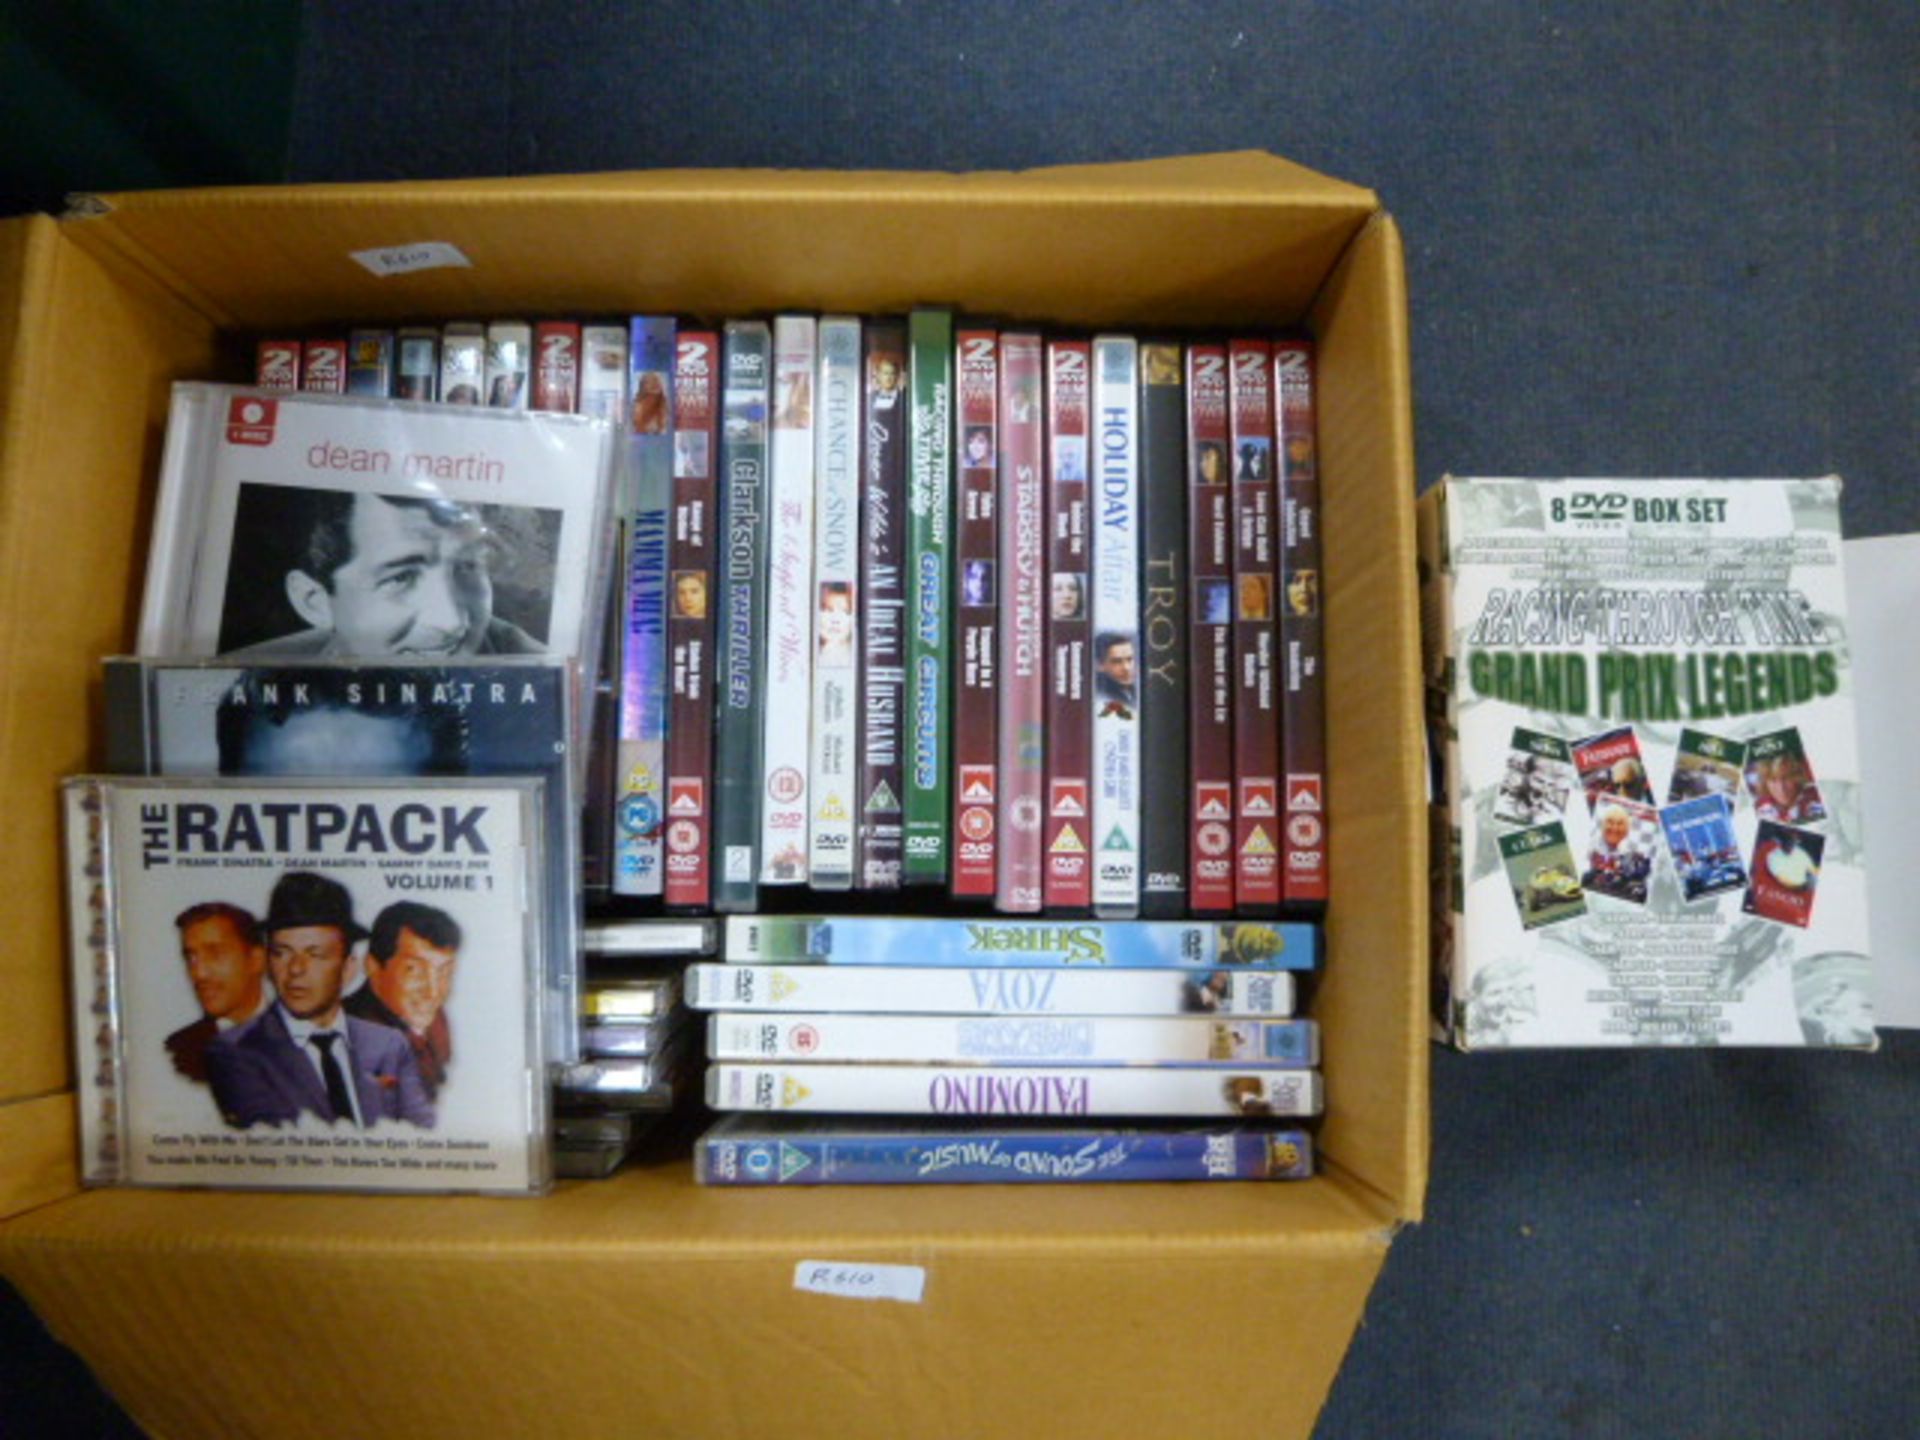 Box of DVDs and CDs